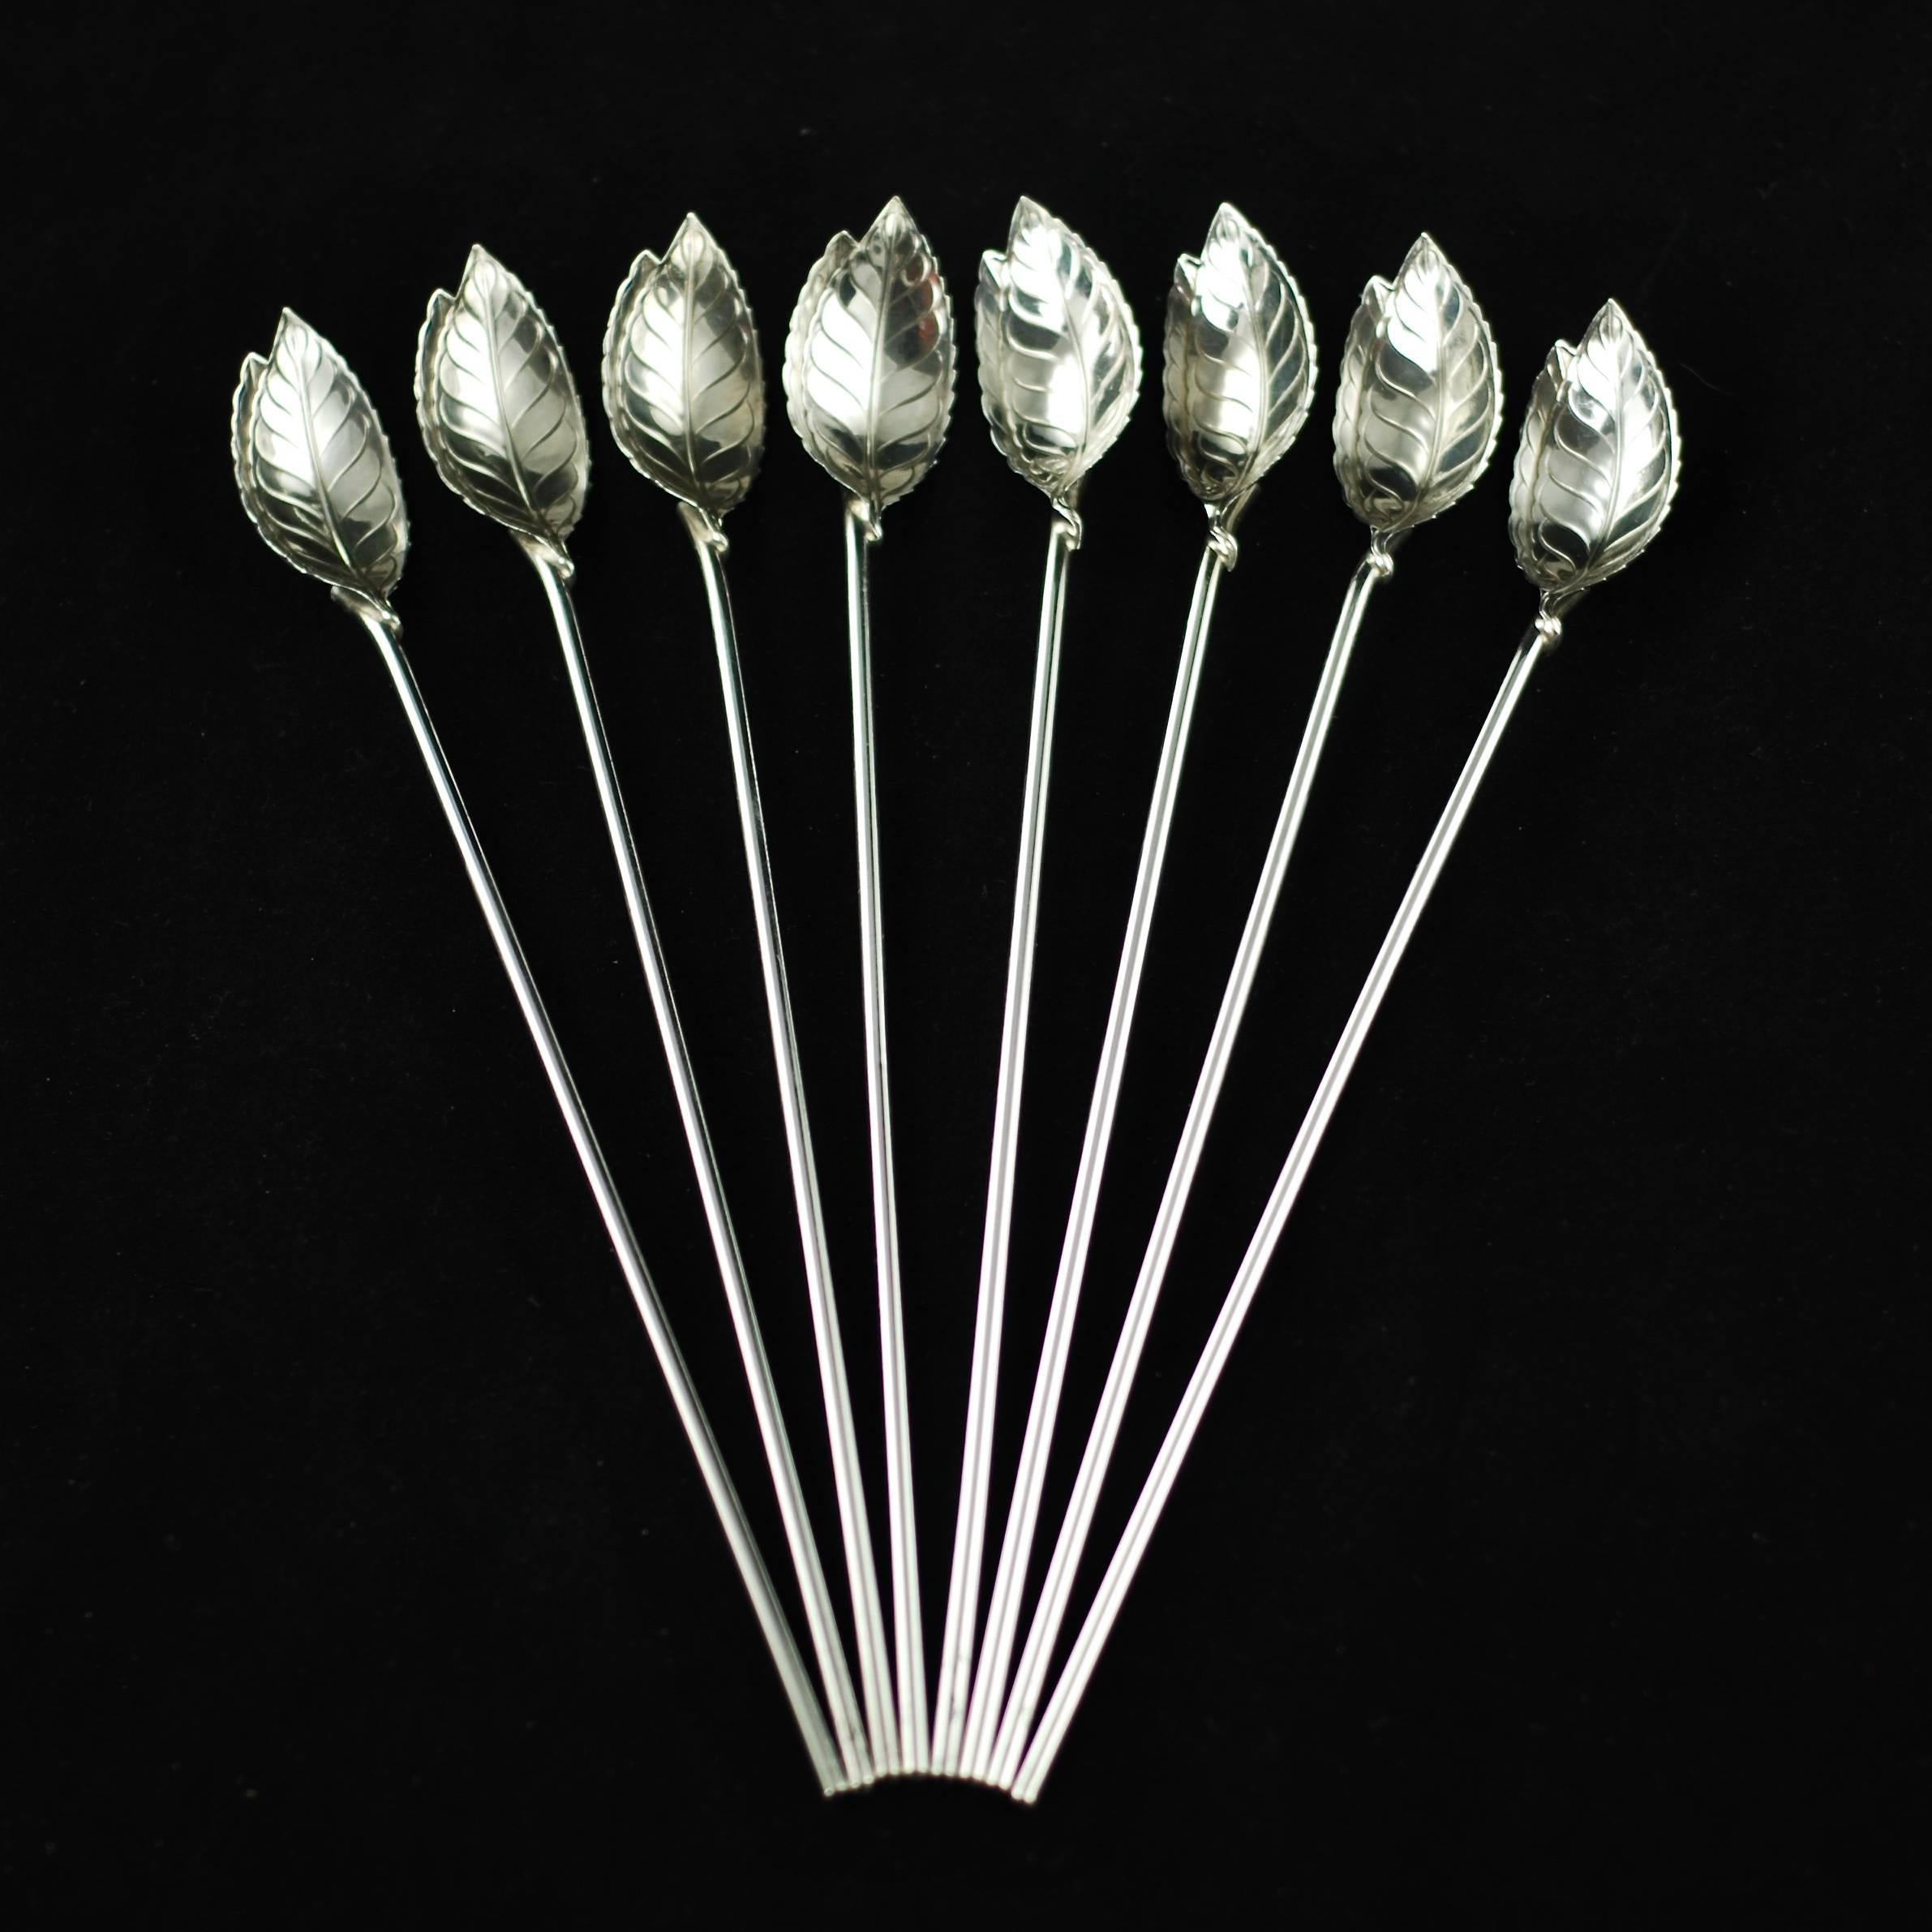 This set of eight mint julep spoons / straws was made by Tiffany & Company. The pieces are composed of sterling silver with bowls that have been cast in the form of realistic mint leaves with serrated edges. The long thin handles are hollow and also